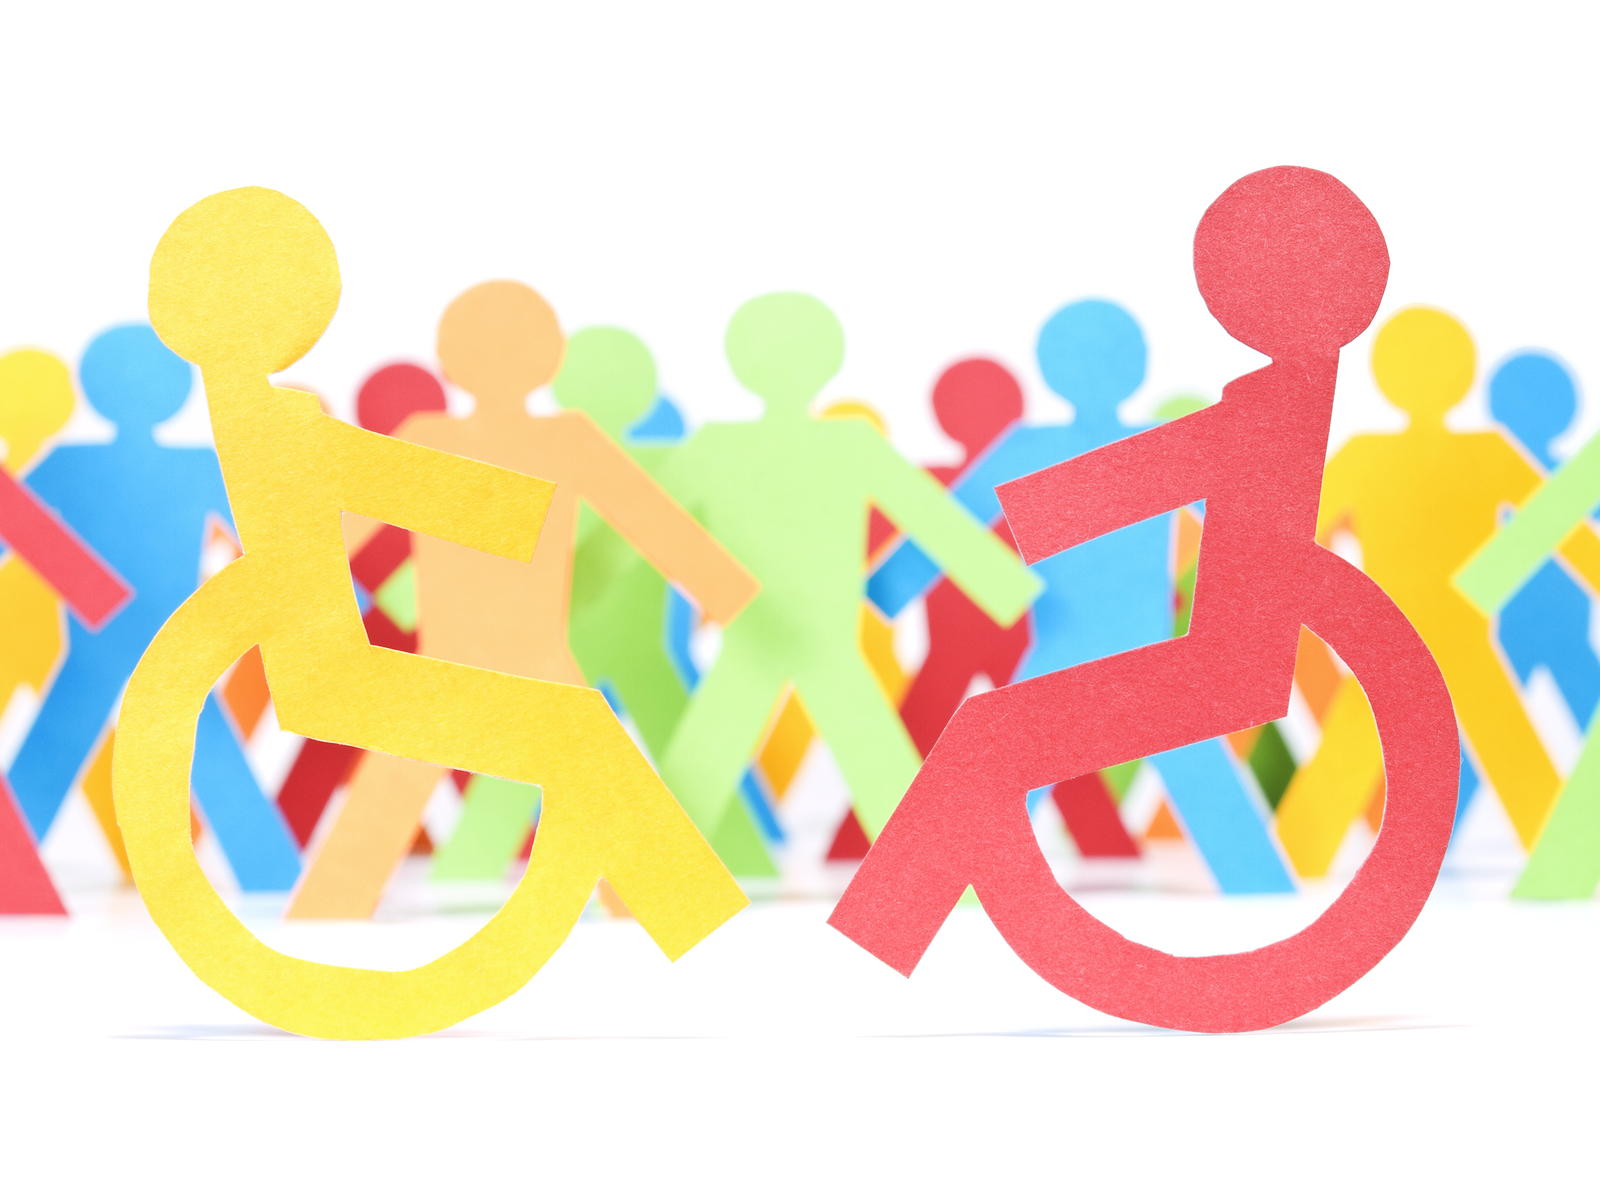 A colourful image of people with disabilities and able-bodied persons living in harmony